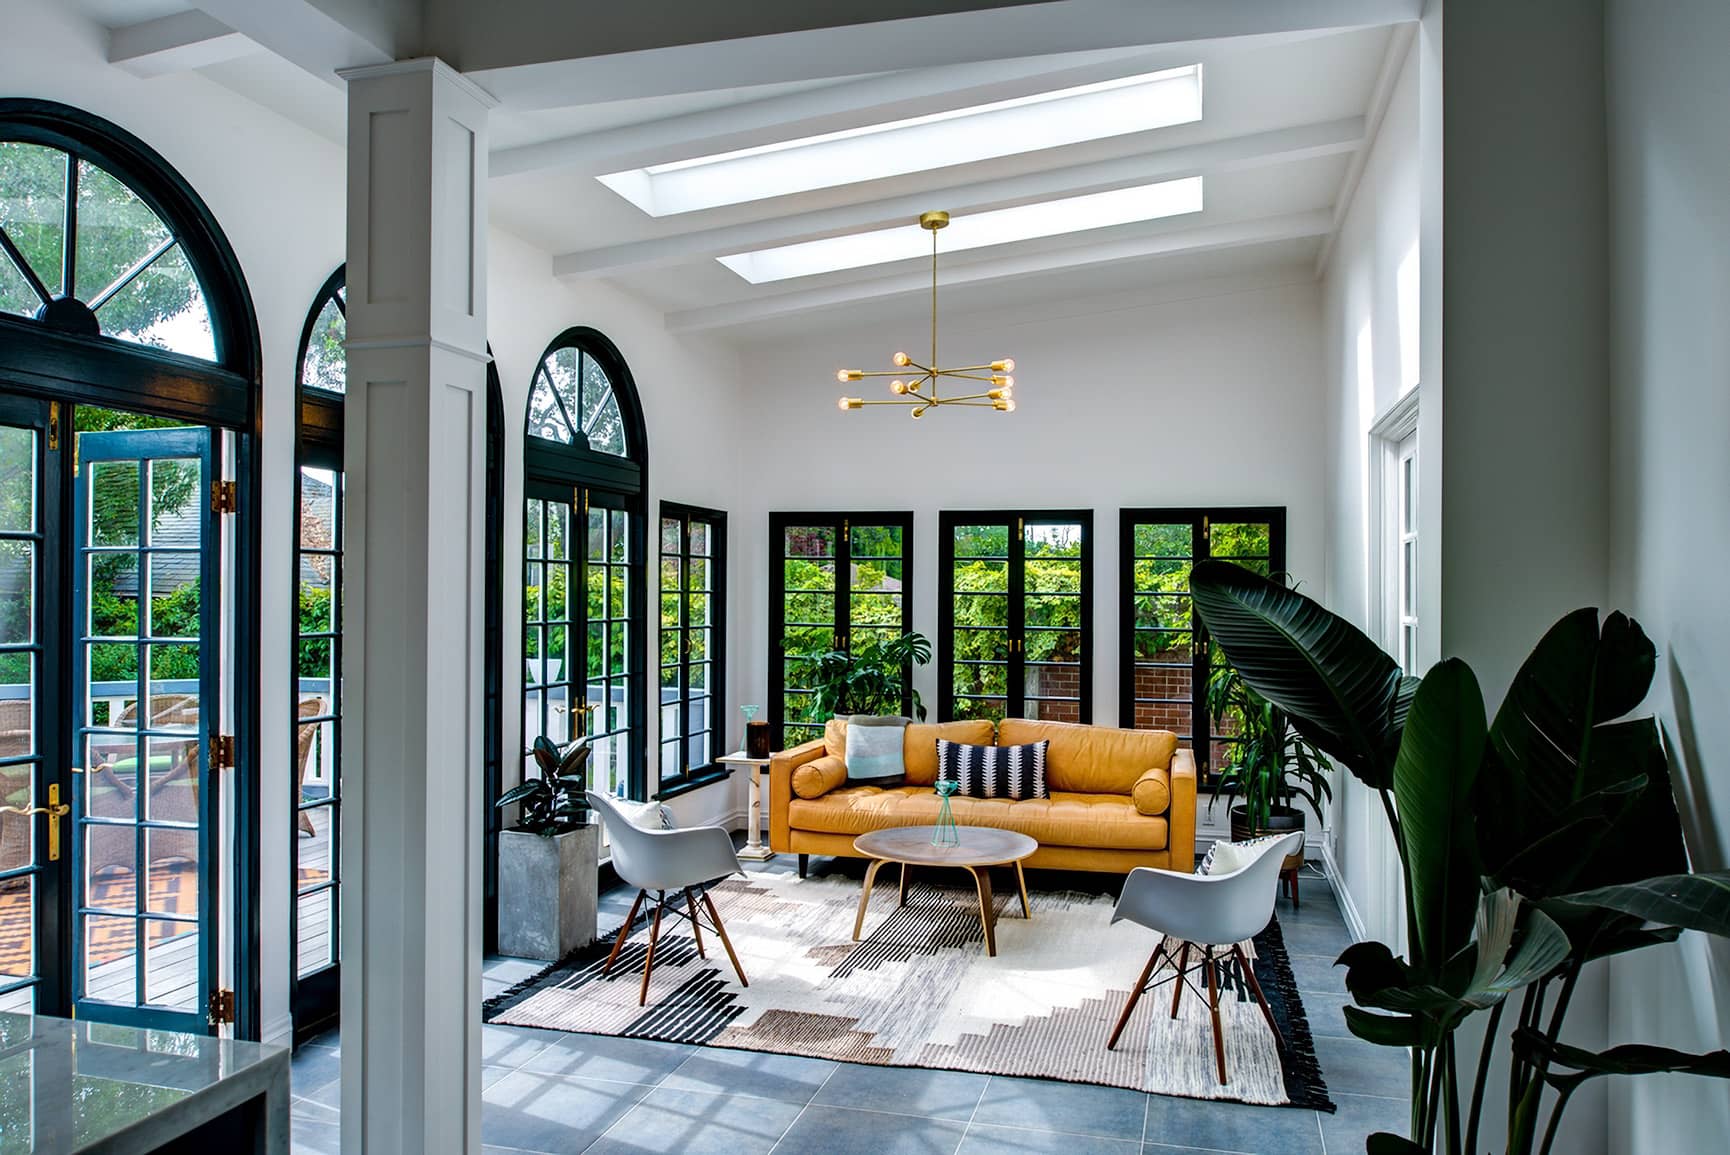 Interior view of sunroom in historical home